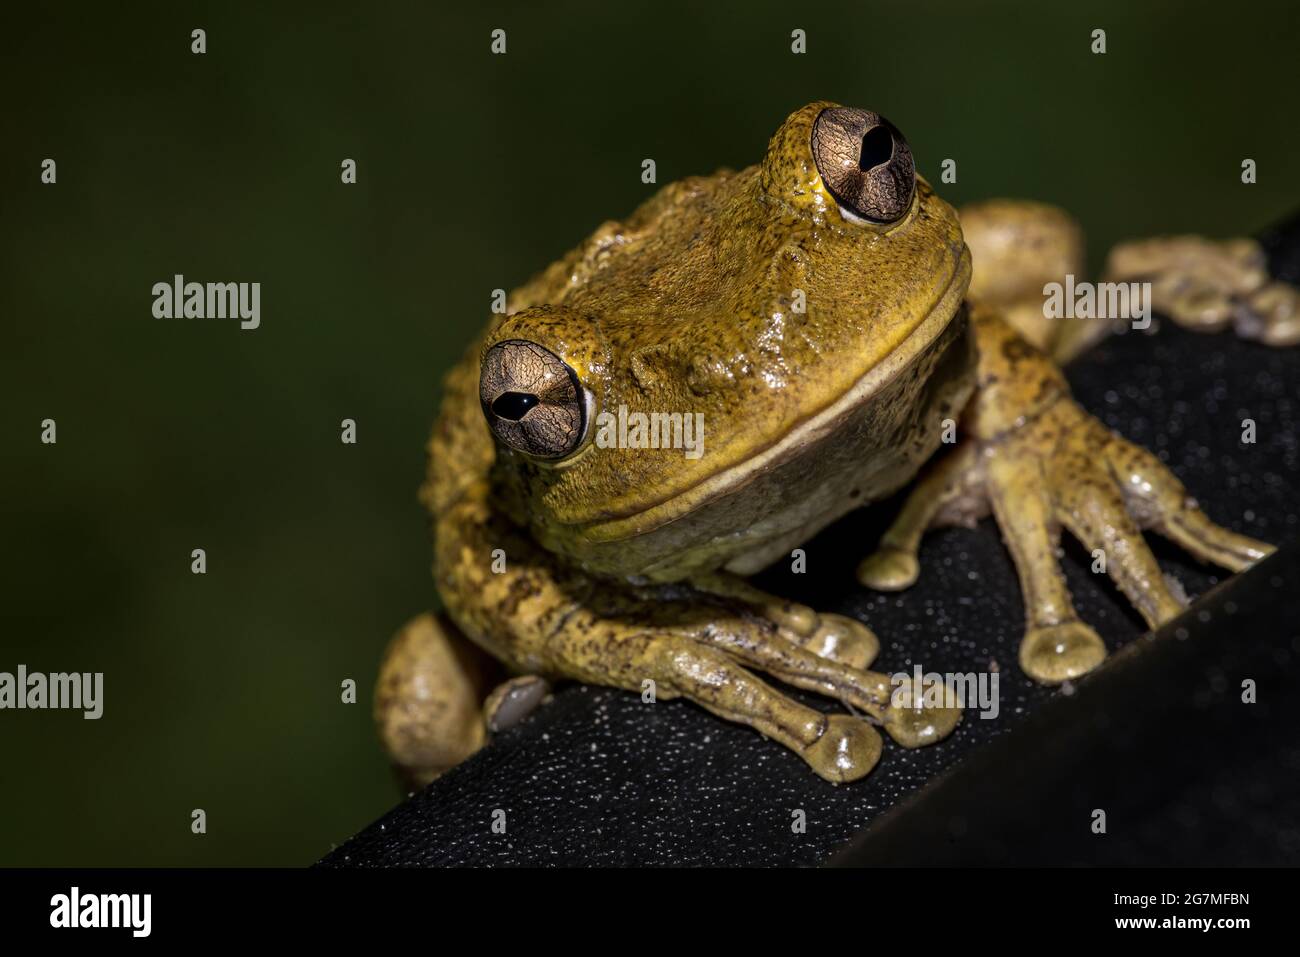 Invasive Cuban tree frog in Florida, Osteophilus septentrionalis, native to Cuba Stock Photo